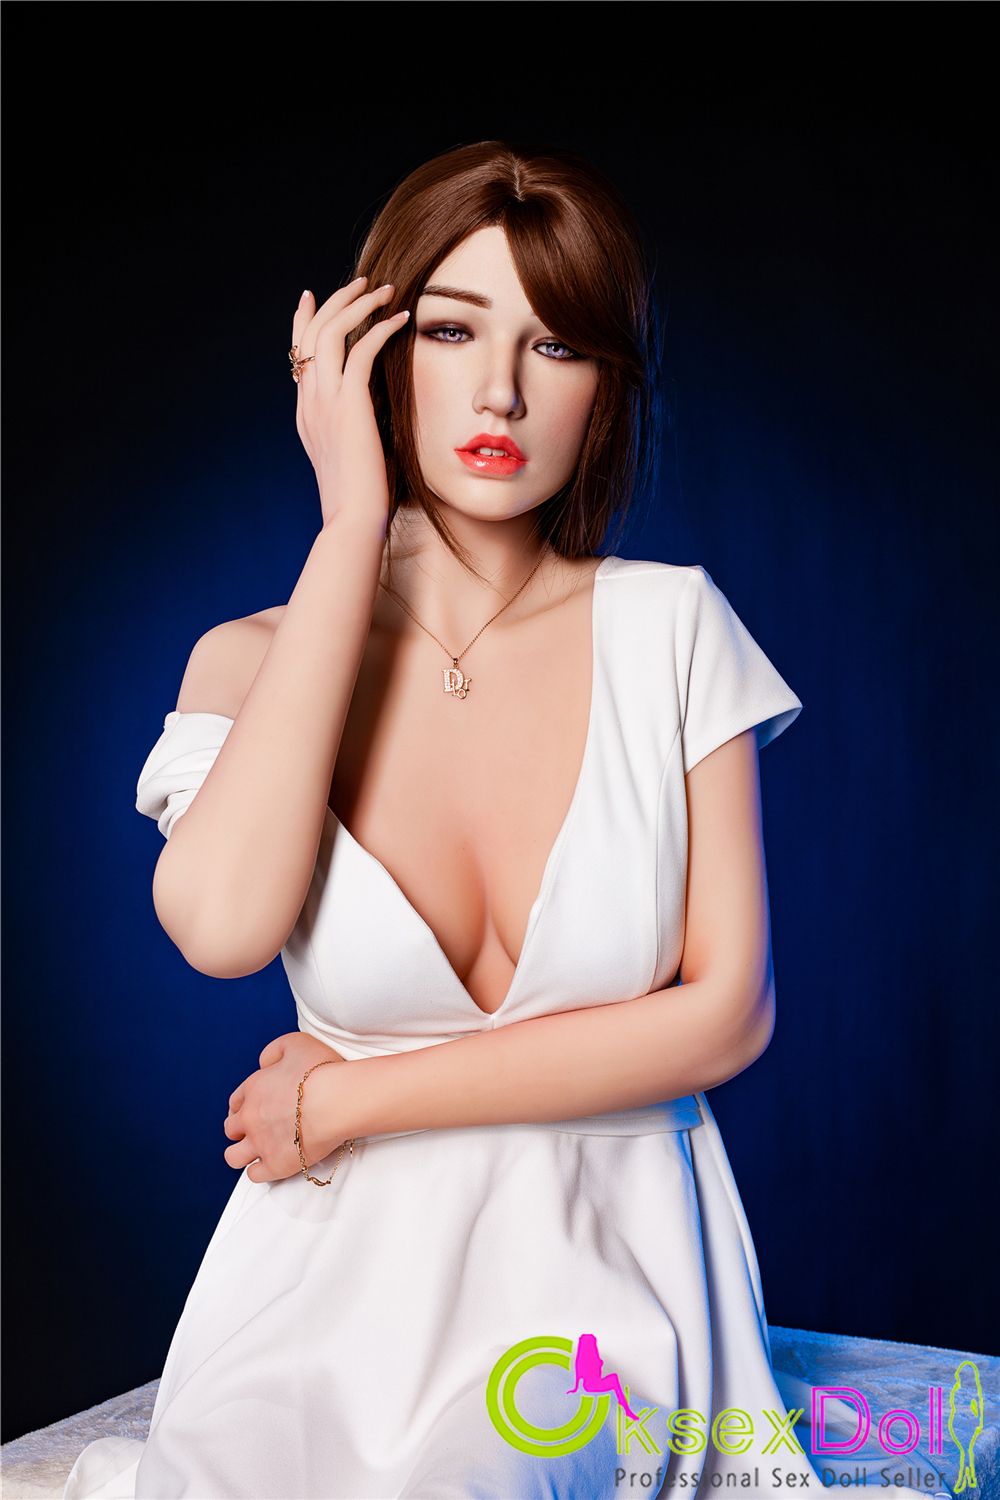 realistic life size sex dolls Pictures